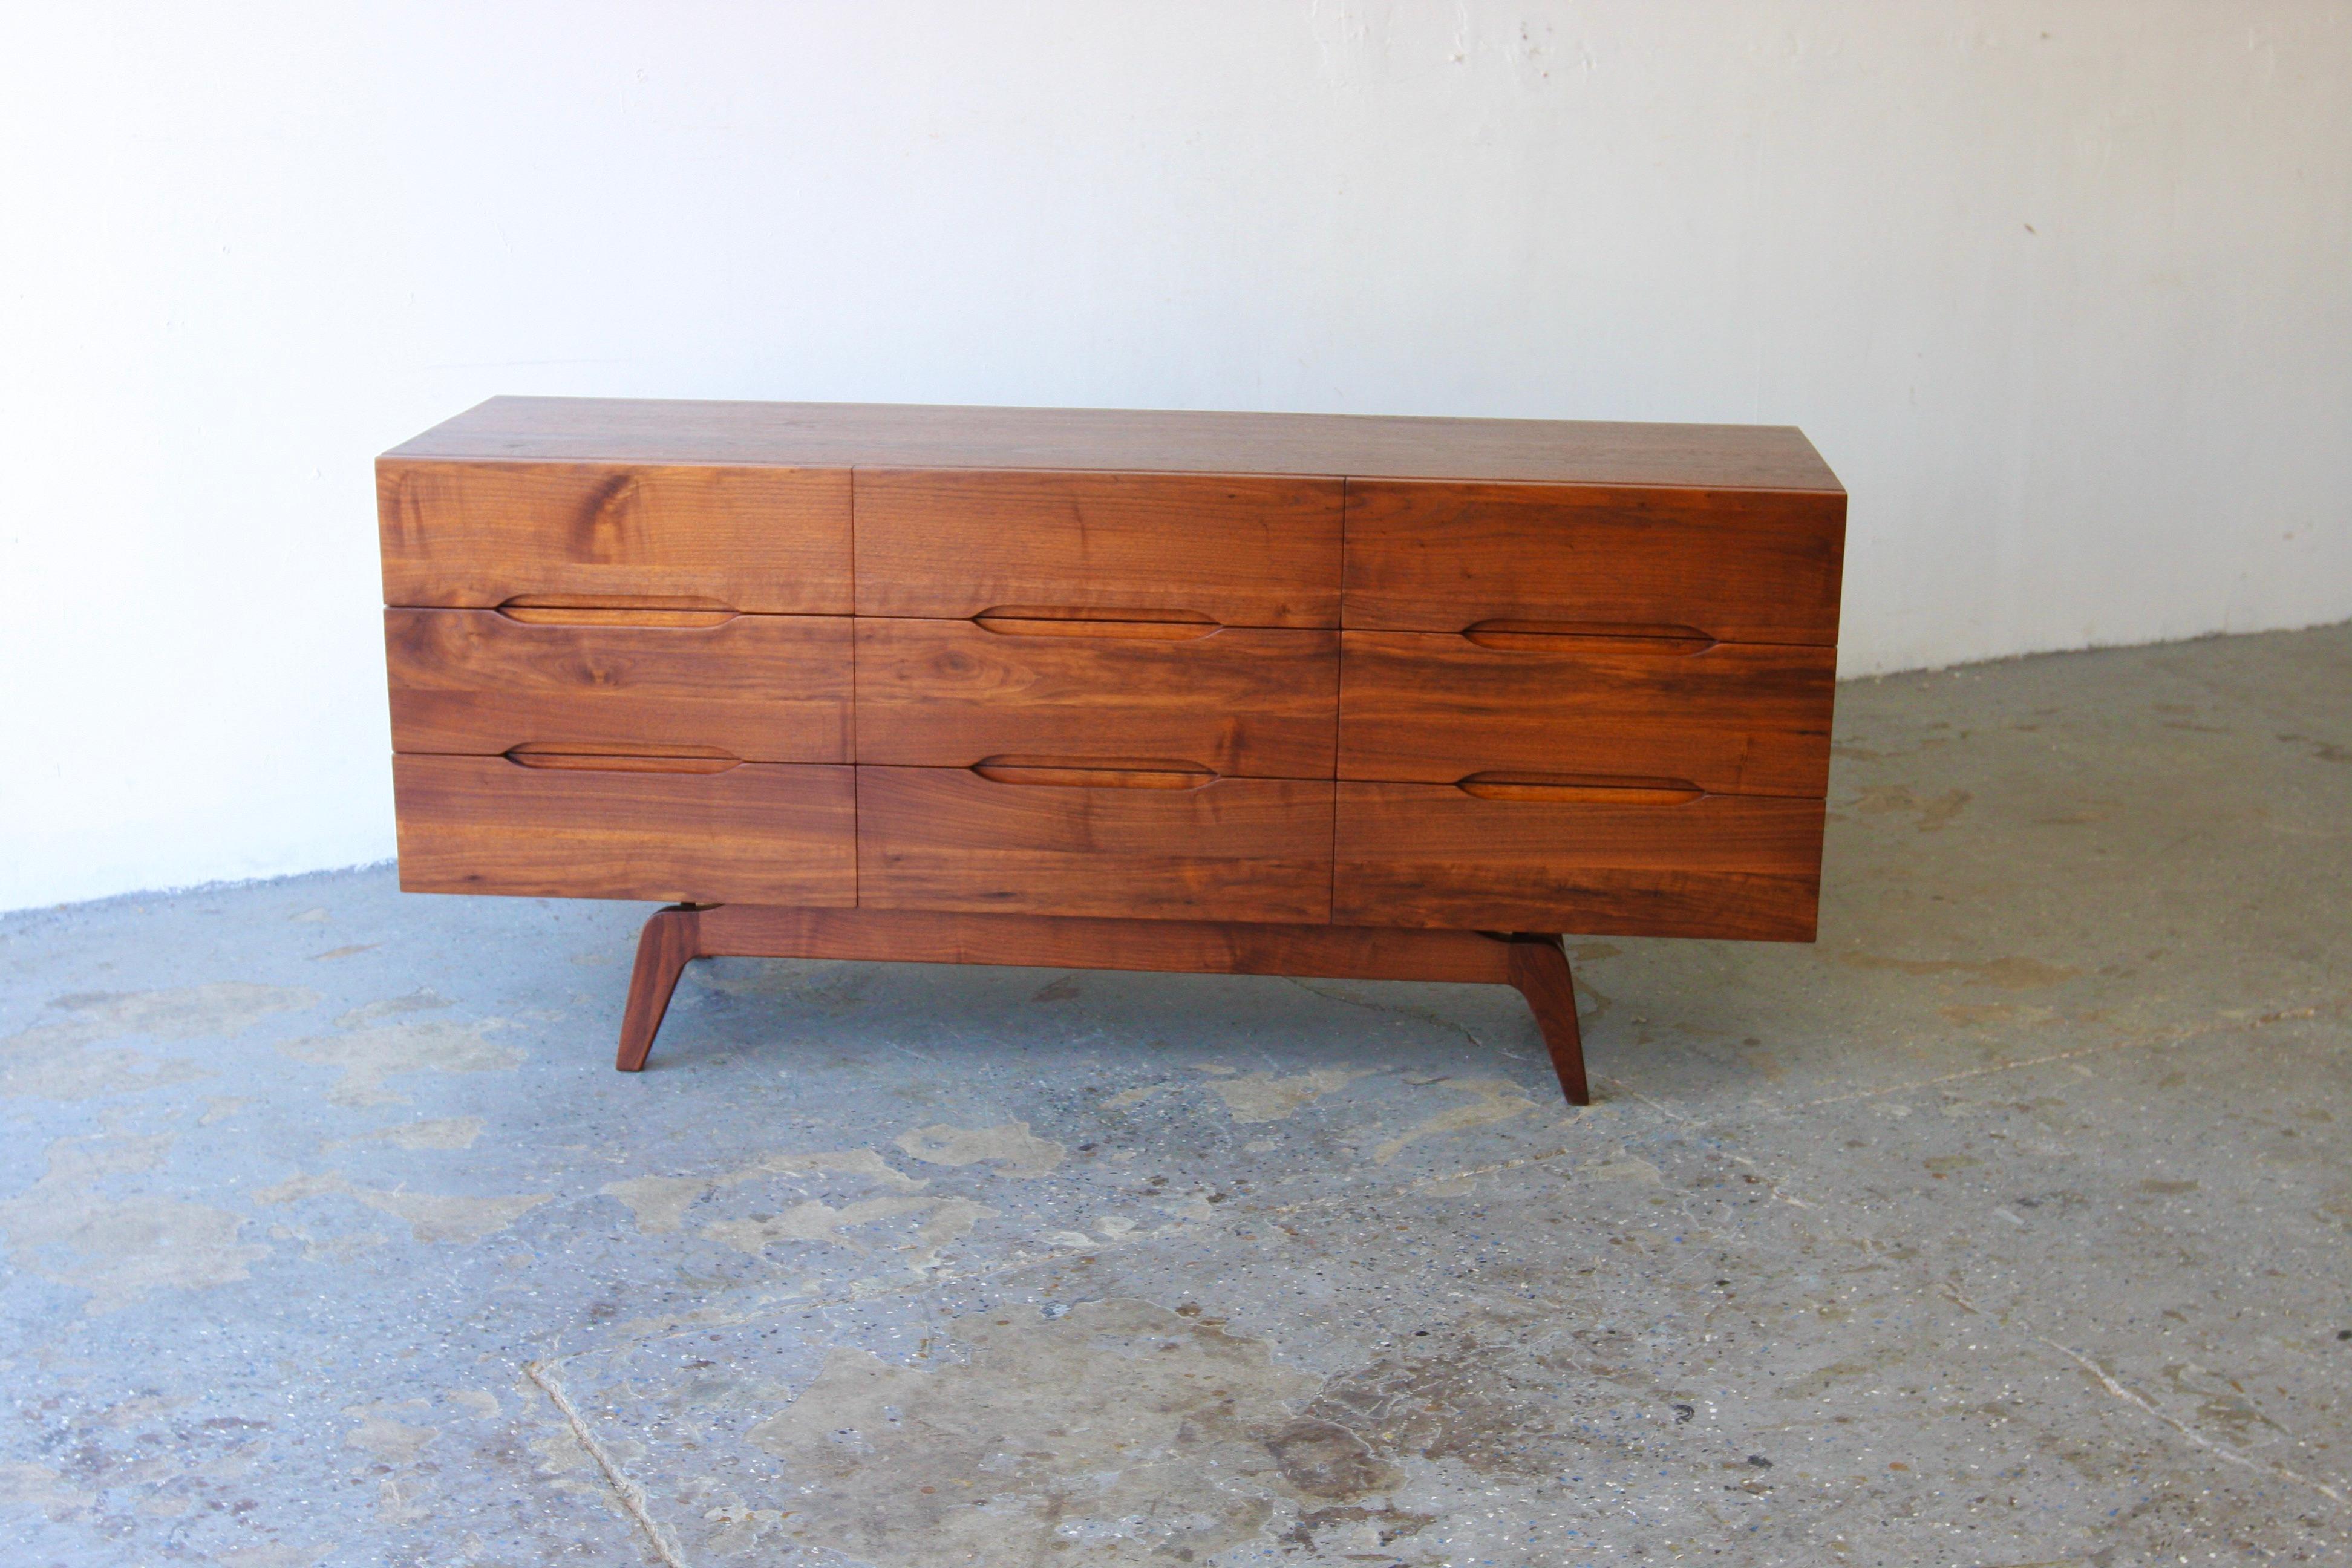 Mid-Century Modern Solid Walnut Dresser/Credenza in the Style of Arne Vodder

This solid walnut dresser, with its exquisite sculpted drawer pulls, epitomizes mid-century modern elegance. The splayed leg design is reminiscent of the works of Vladimir